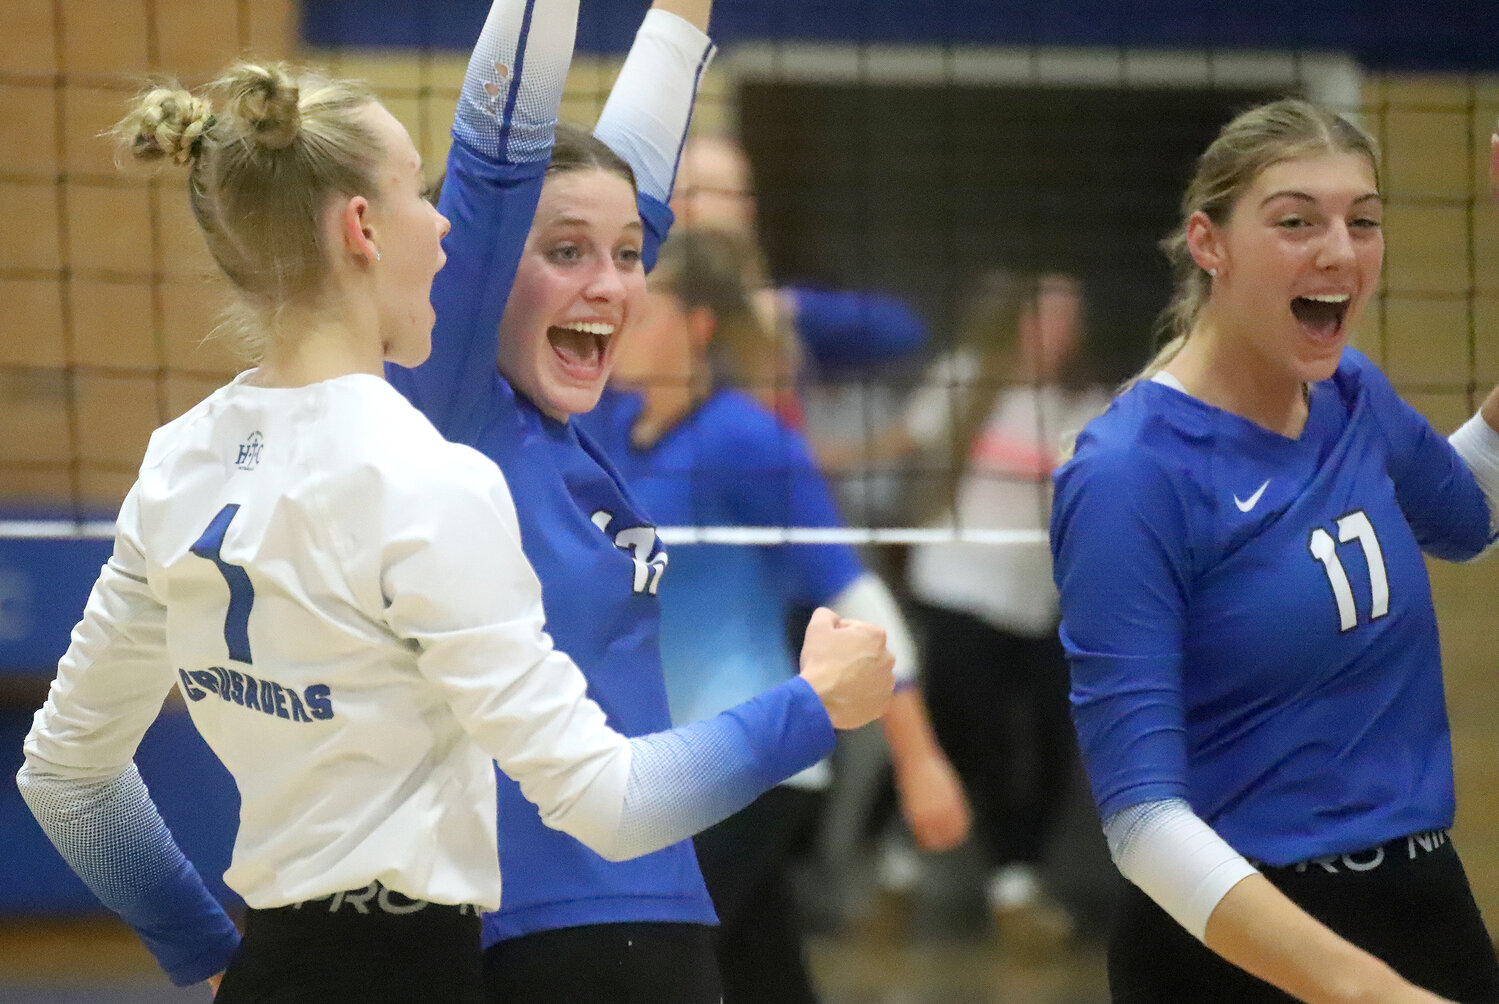 HTC's Teagan Snaadt, Mary Kate Bendlage, and Presley Myers celebrate a point in the second set as the Crusaders opened up an 18-1 lead over Danville en route to a sweep in the Region 8 quarterfinals Wednesday at Shottenkirk Gym.